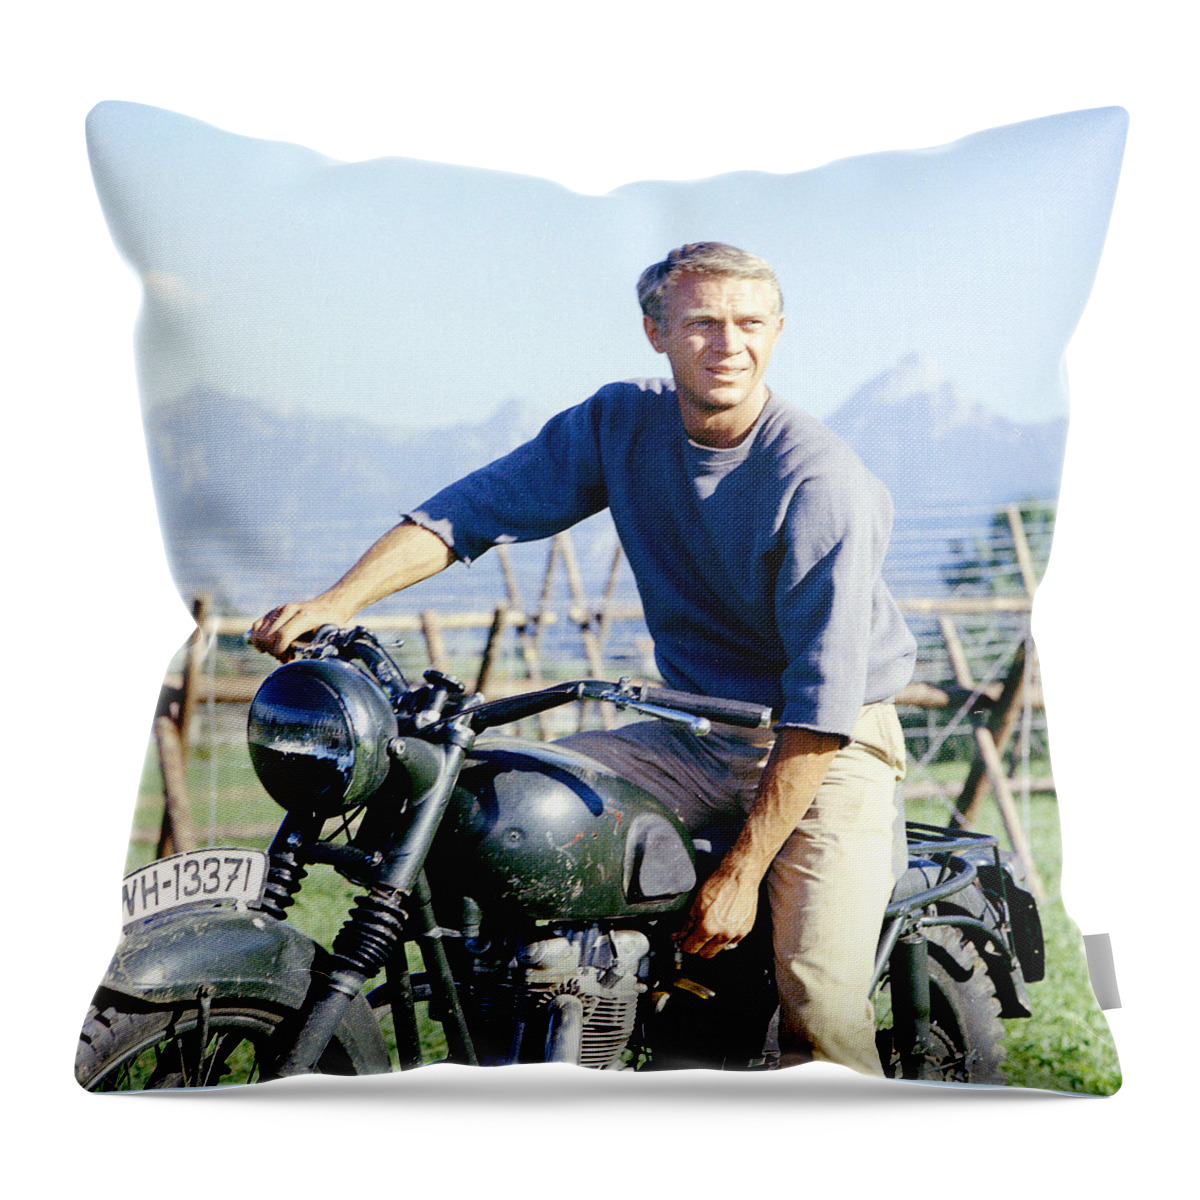 Steve Mcqueen Throw Pillow featuring the digital art The Great Escape by Georgia Fowler